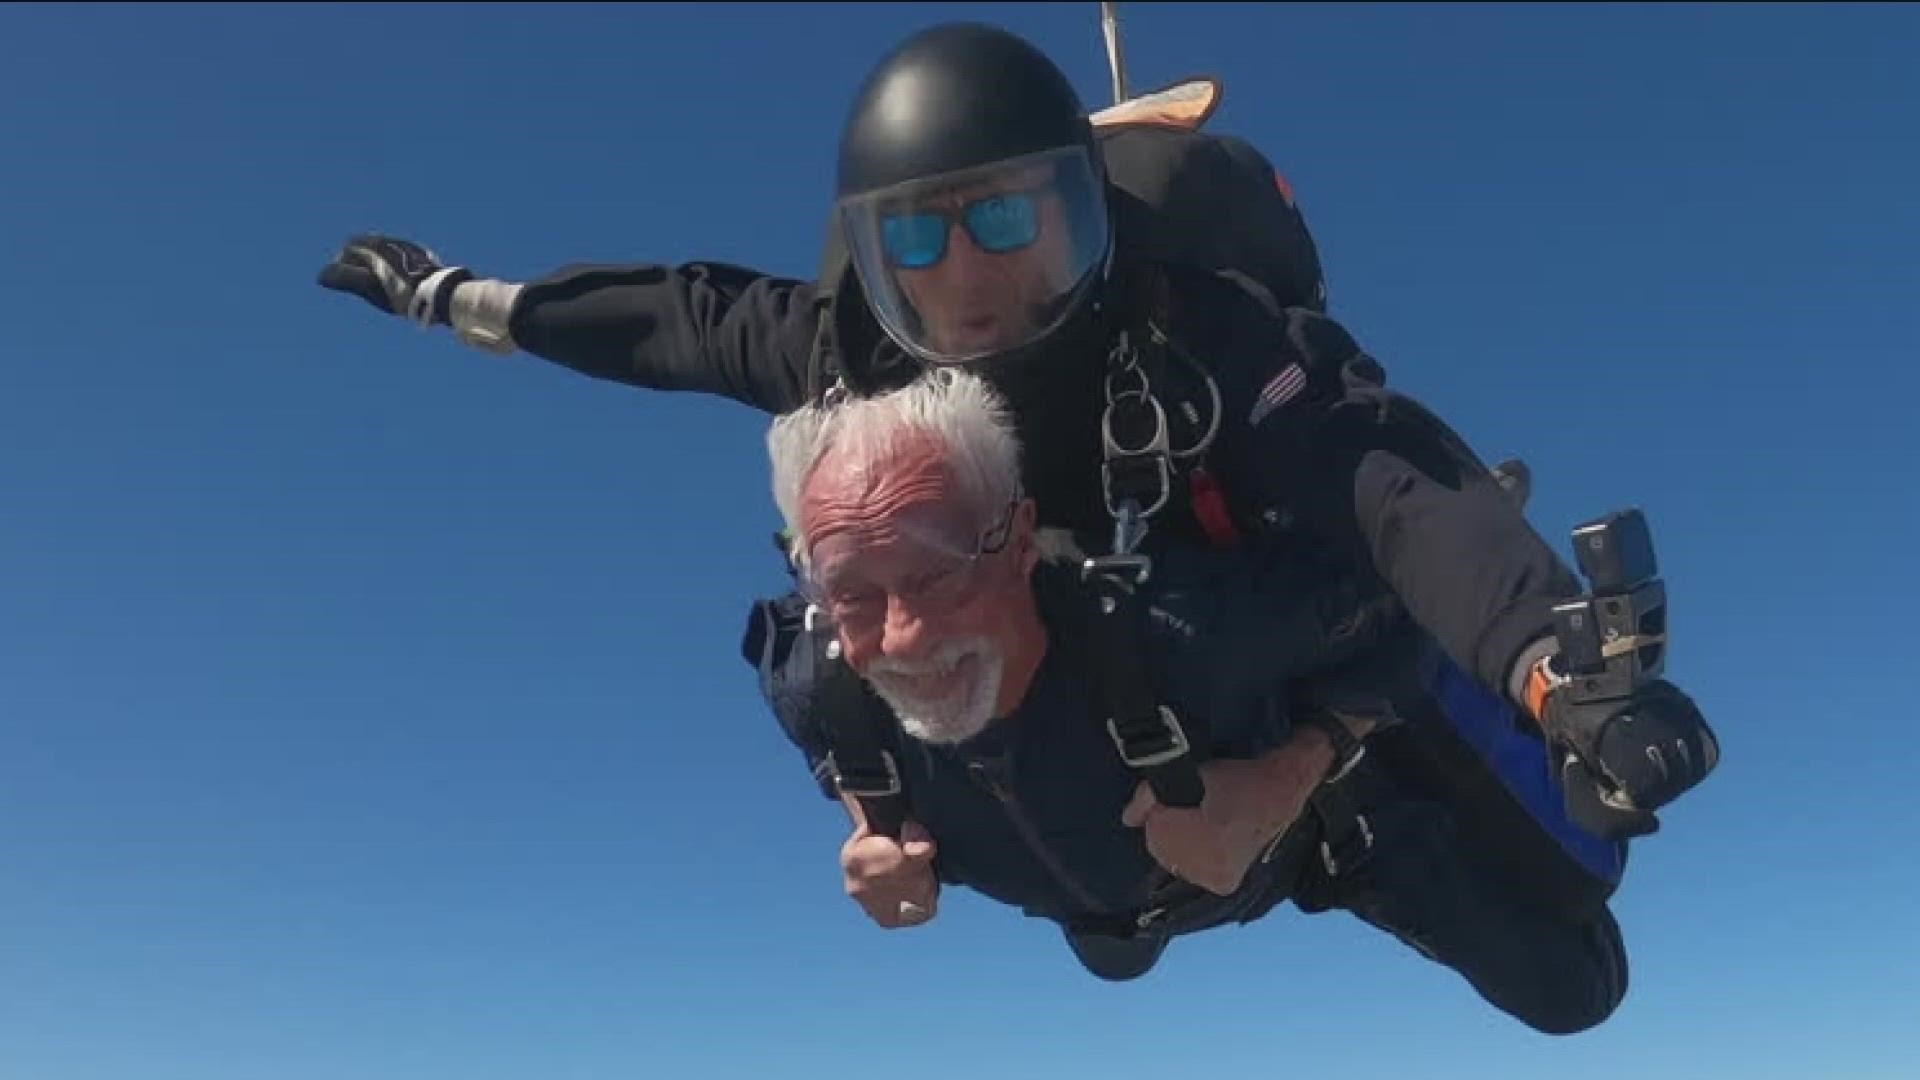 Mike Caliguiri jumped from 13,000 feet with eleven of his family members.